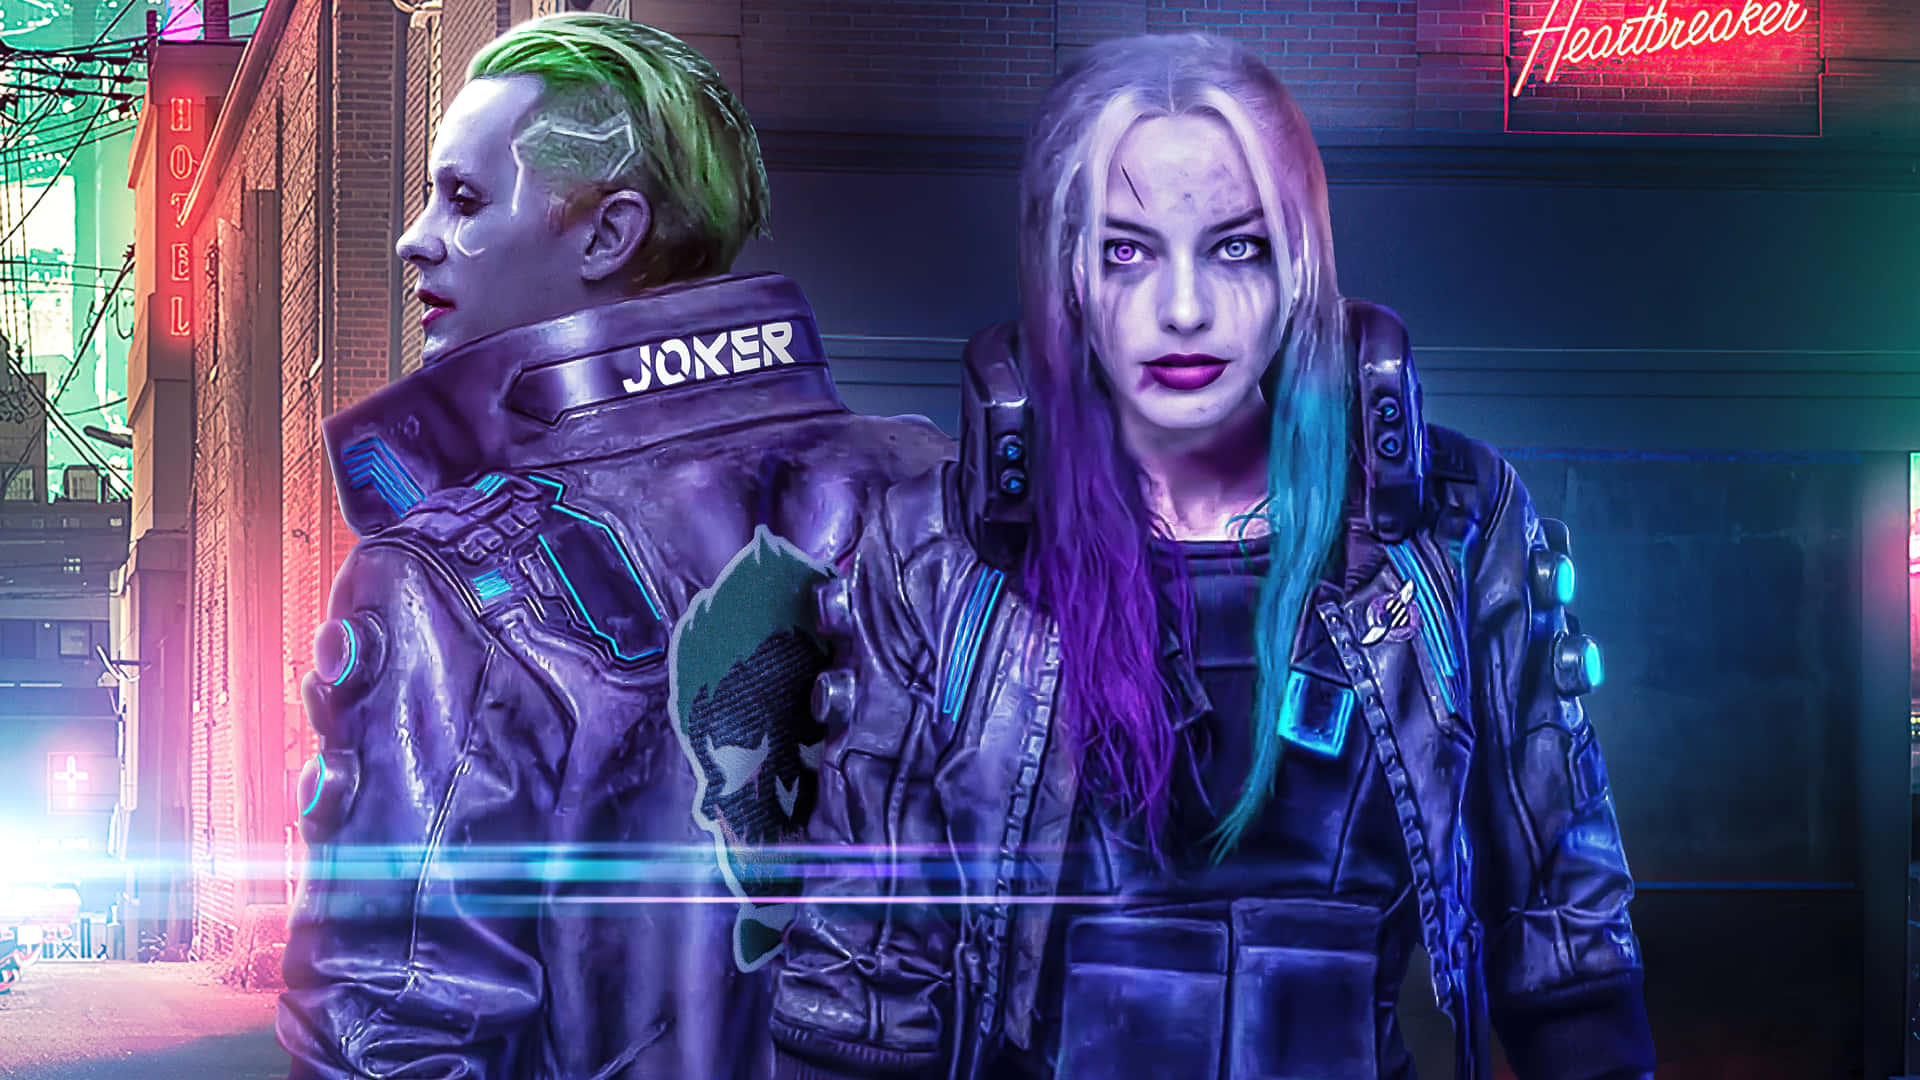 Free Love Joker And Harley Quinn Suicide Squad Wallpaper Downloads, [100+]  Love Joker And Harley Quinn Suicide Squad Wallpapers for FREE | Wallpapers .com